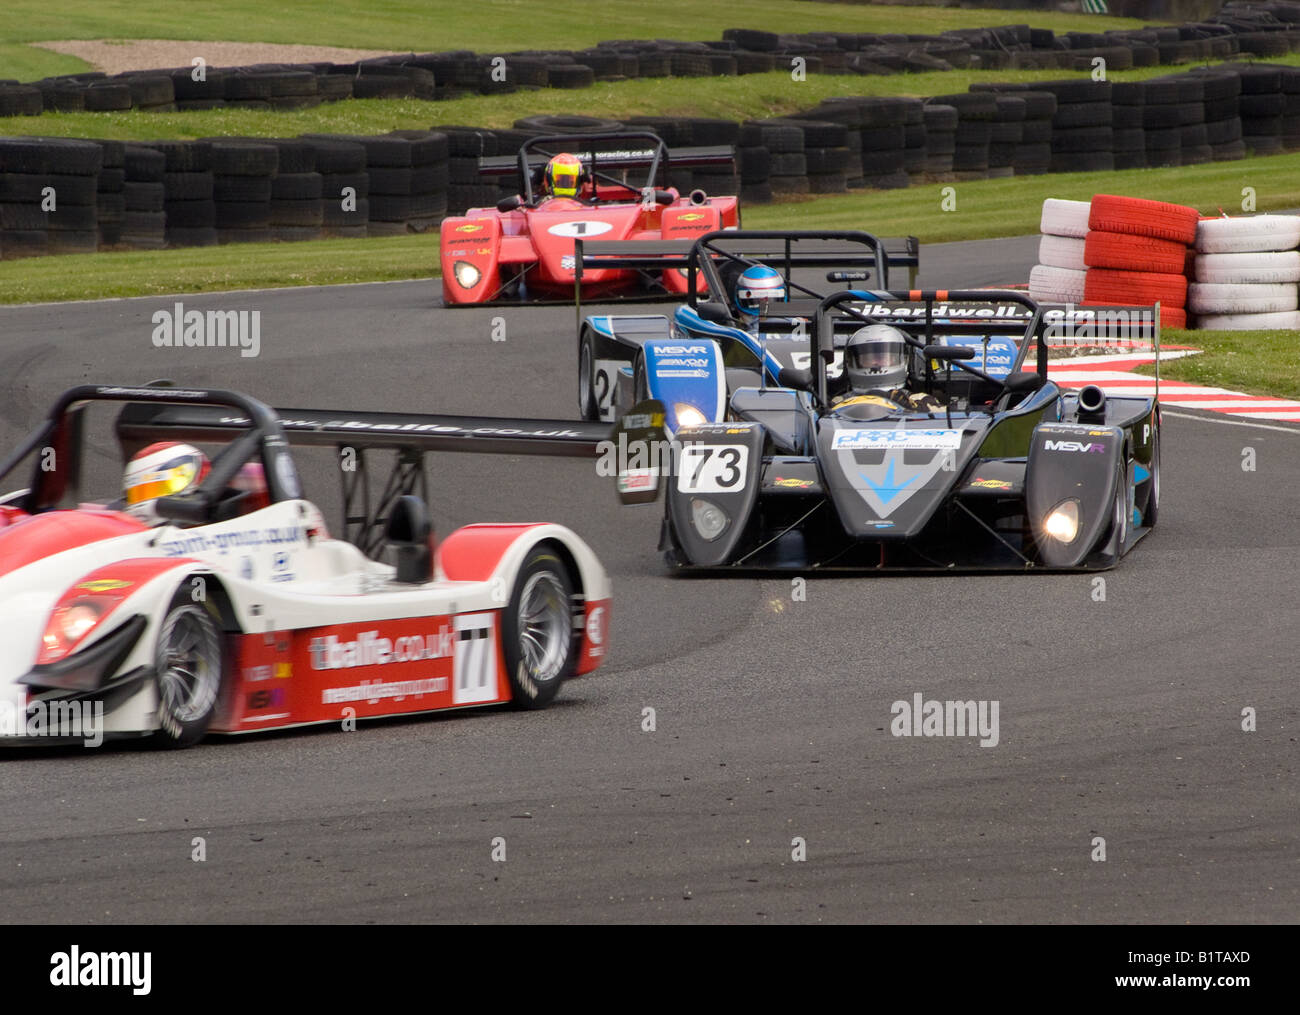 Norma M20f and Three Juno SSE V de V UK Sports Racing Cars in Brittens Corner at Oulton Park Motor Racing Circuit Cheshire UK Stock Photo